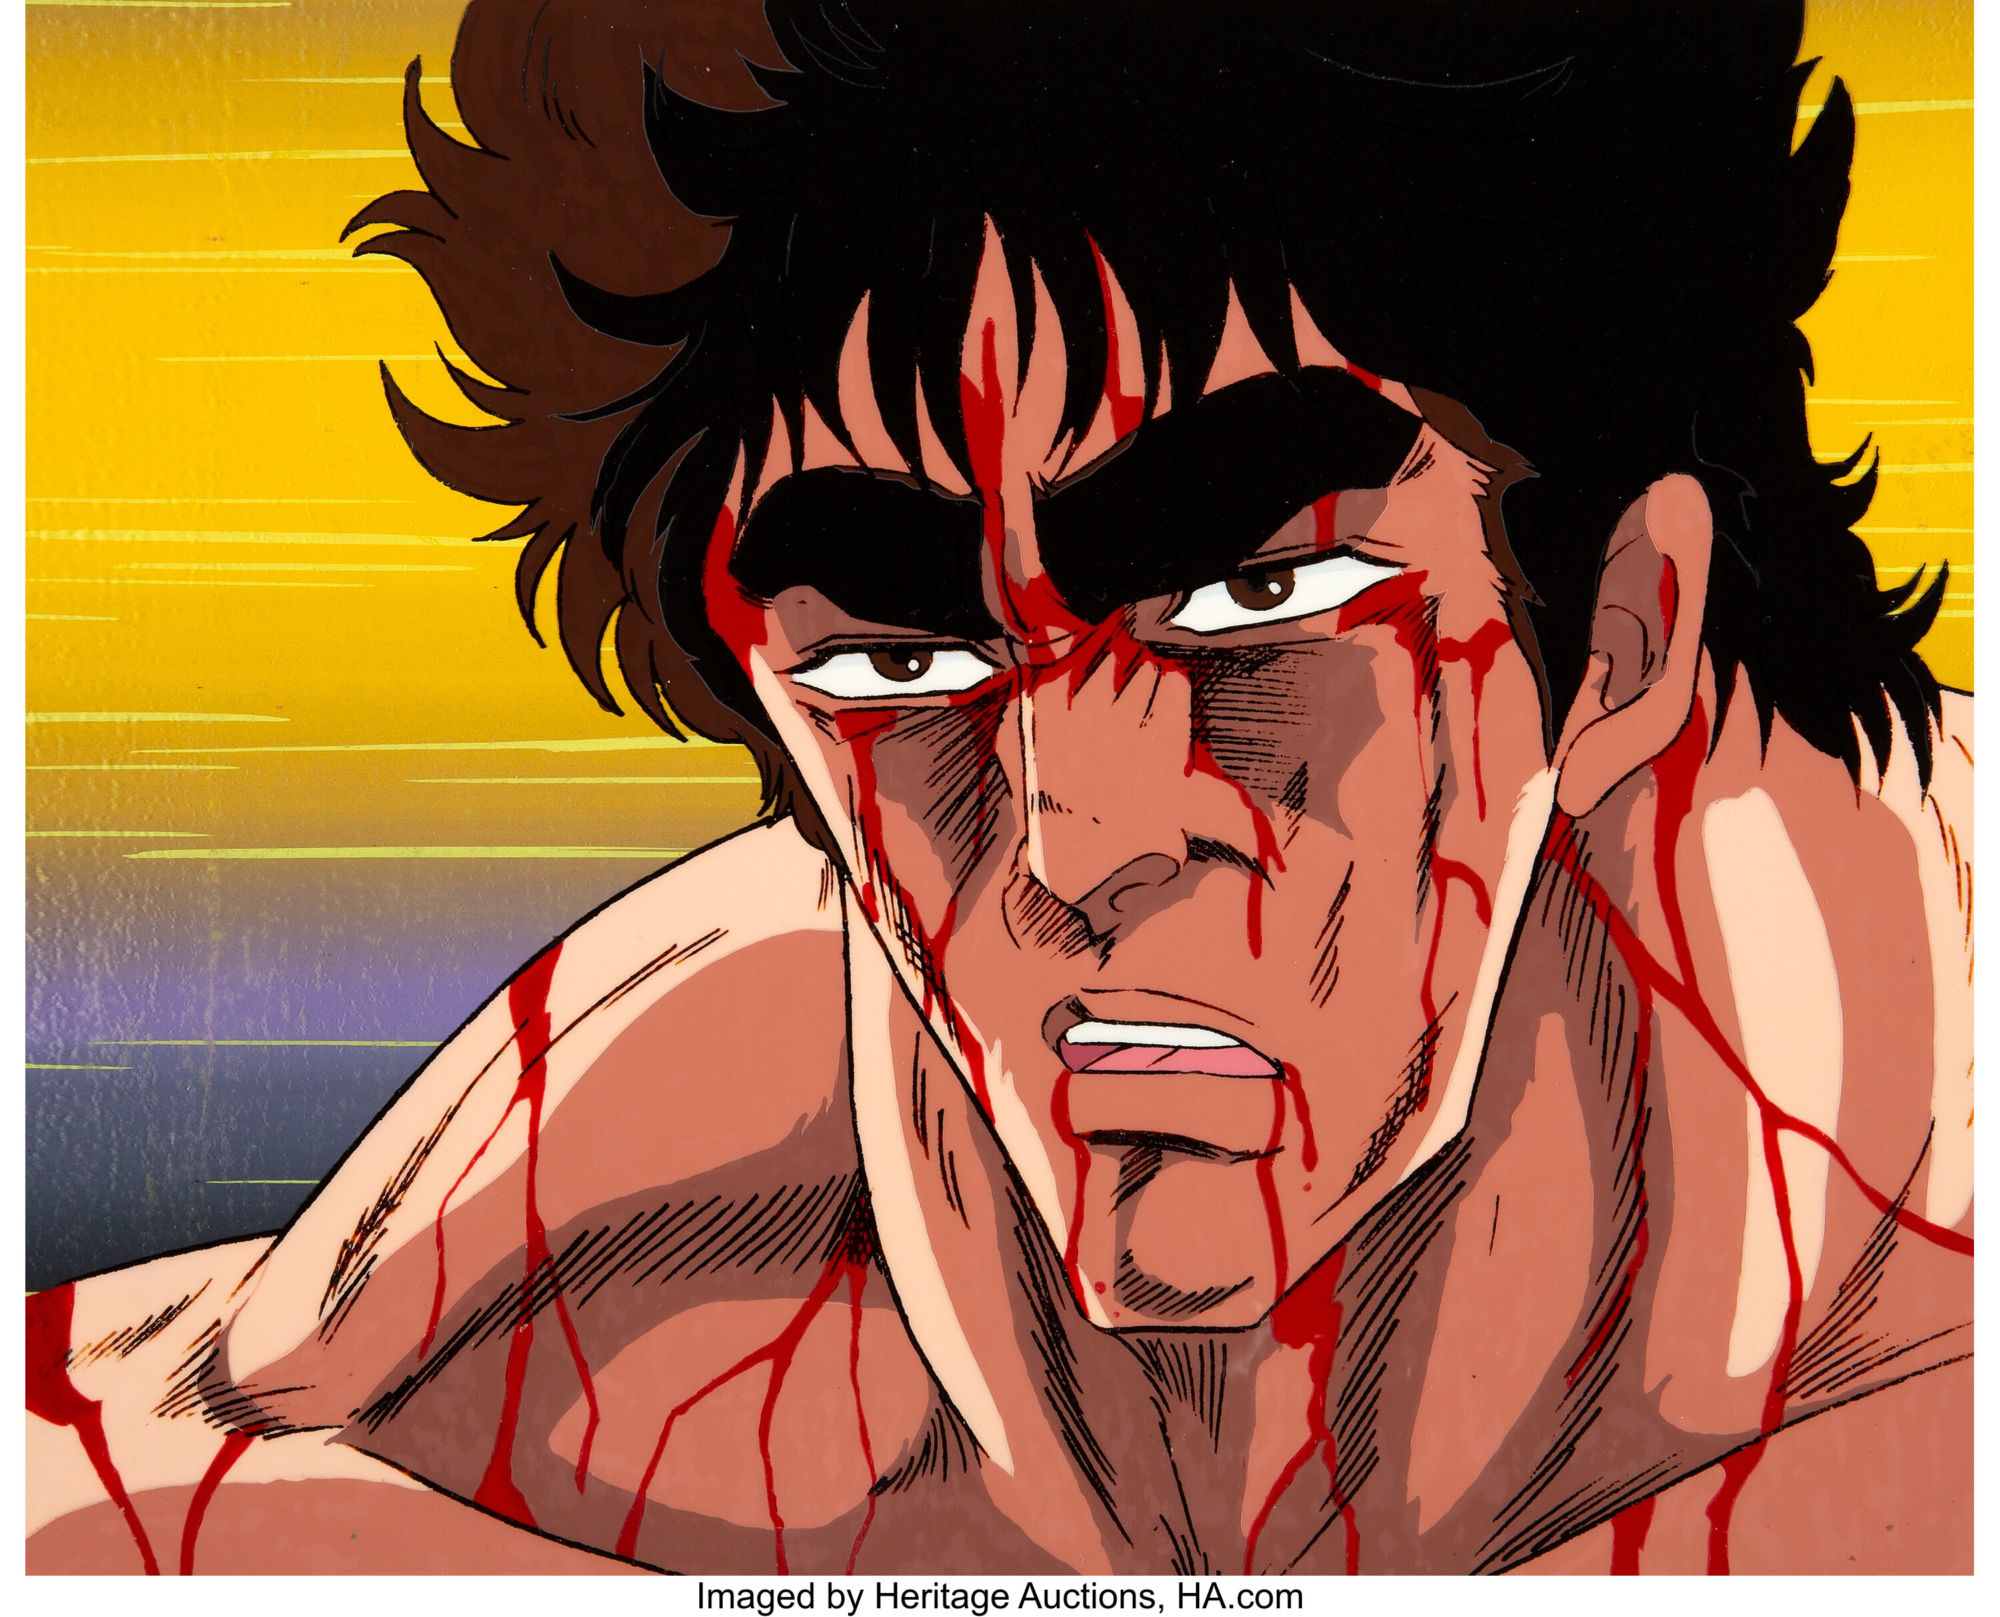 Fist of the North Star Spinoff Release Date Announced